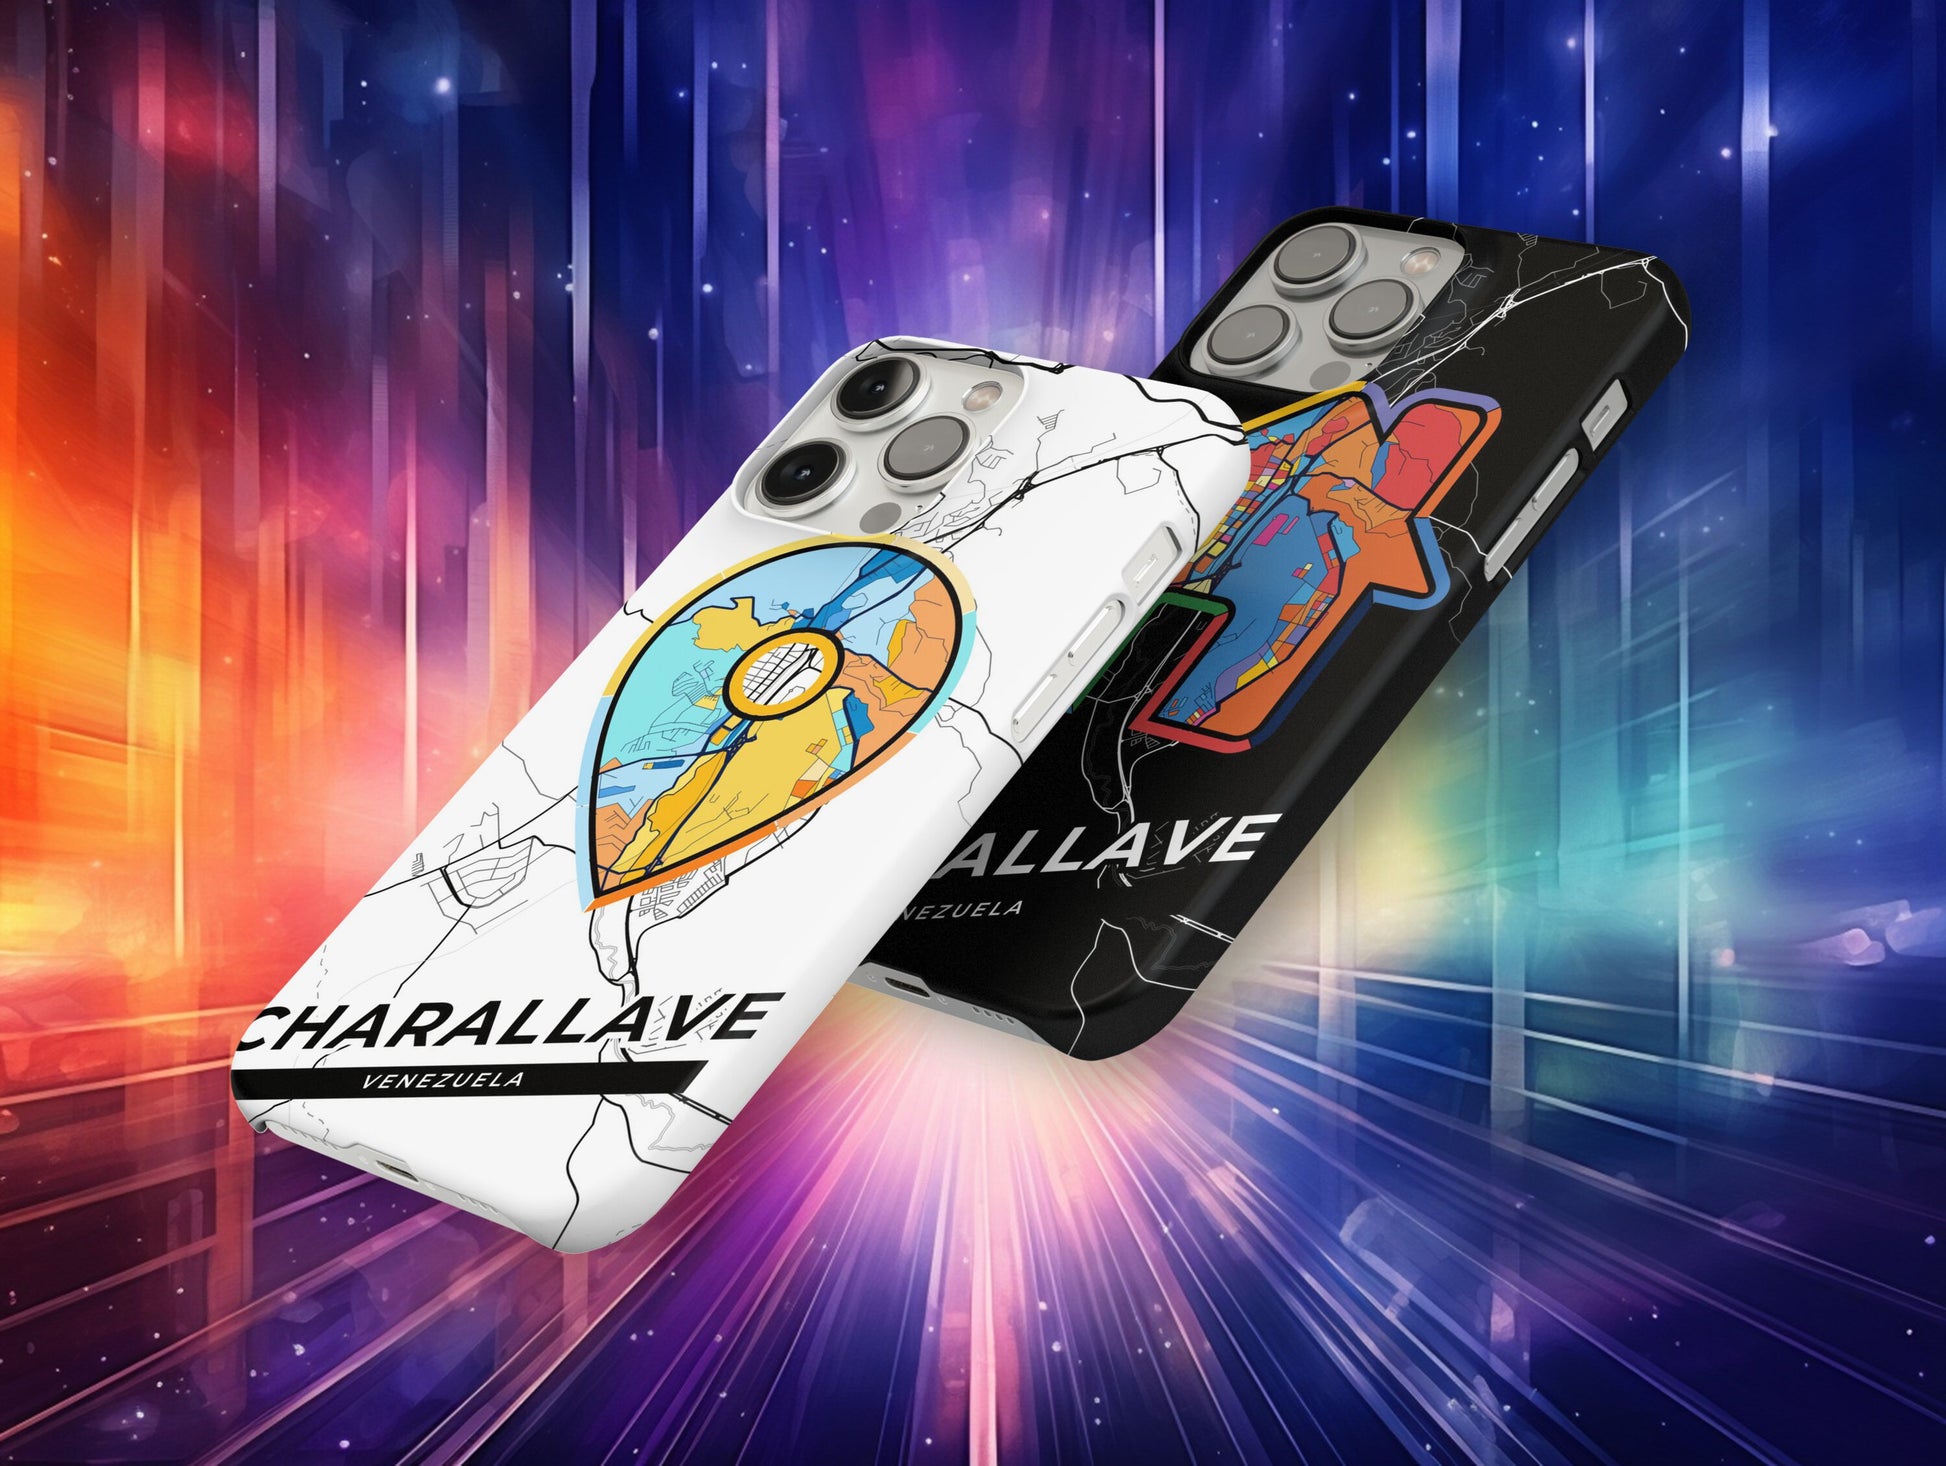 Charallave Venezuela slim phone case with colorful icon. Birthday, wedding or housewarming gift. Couple match cases.